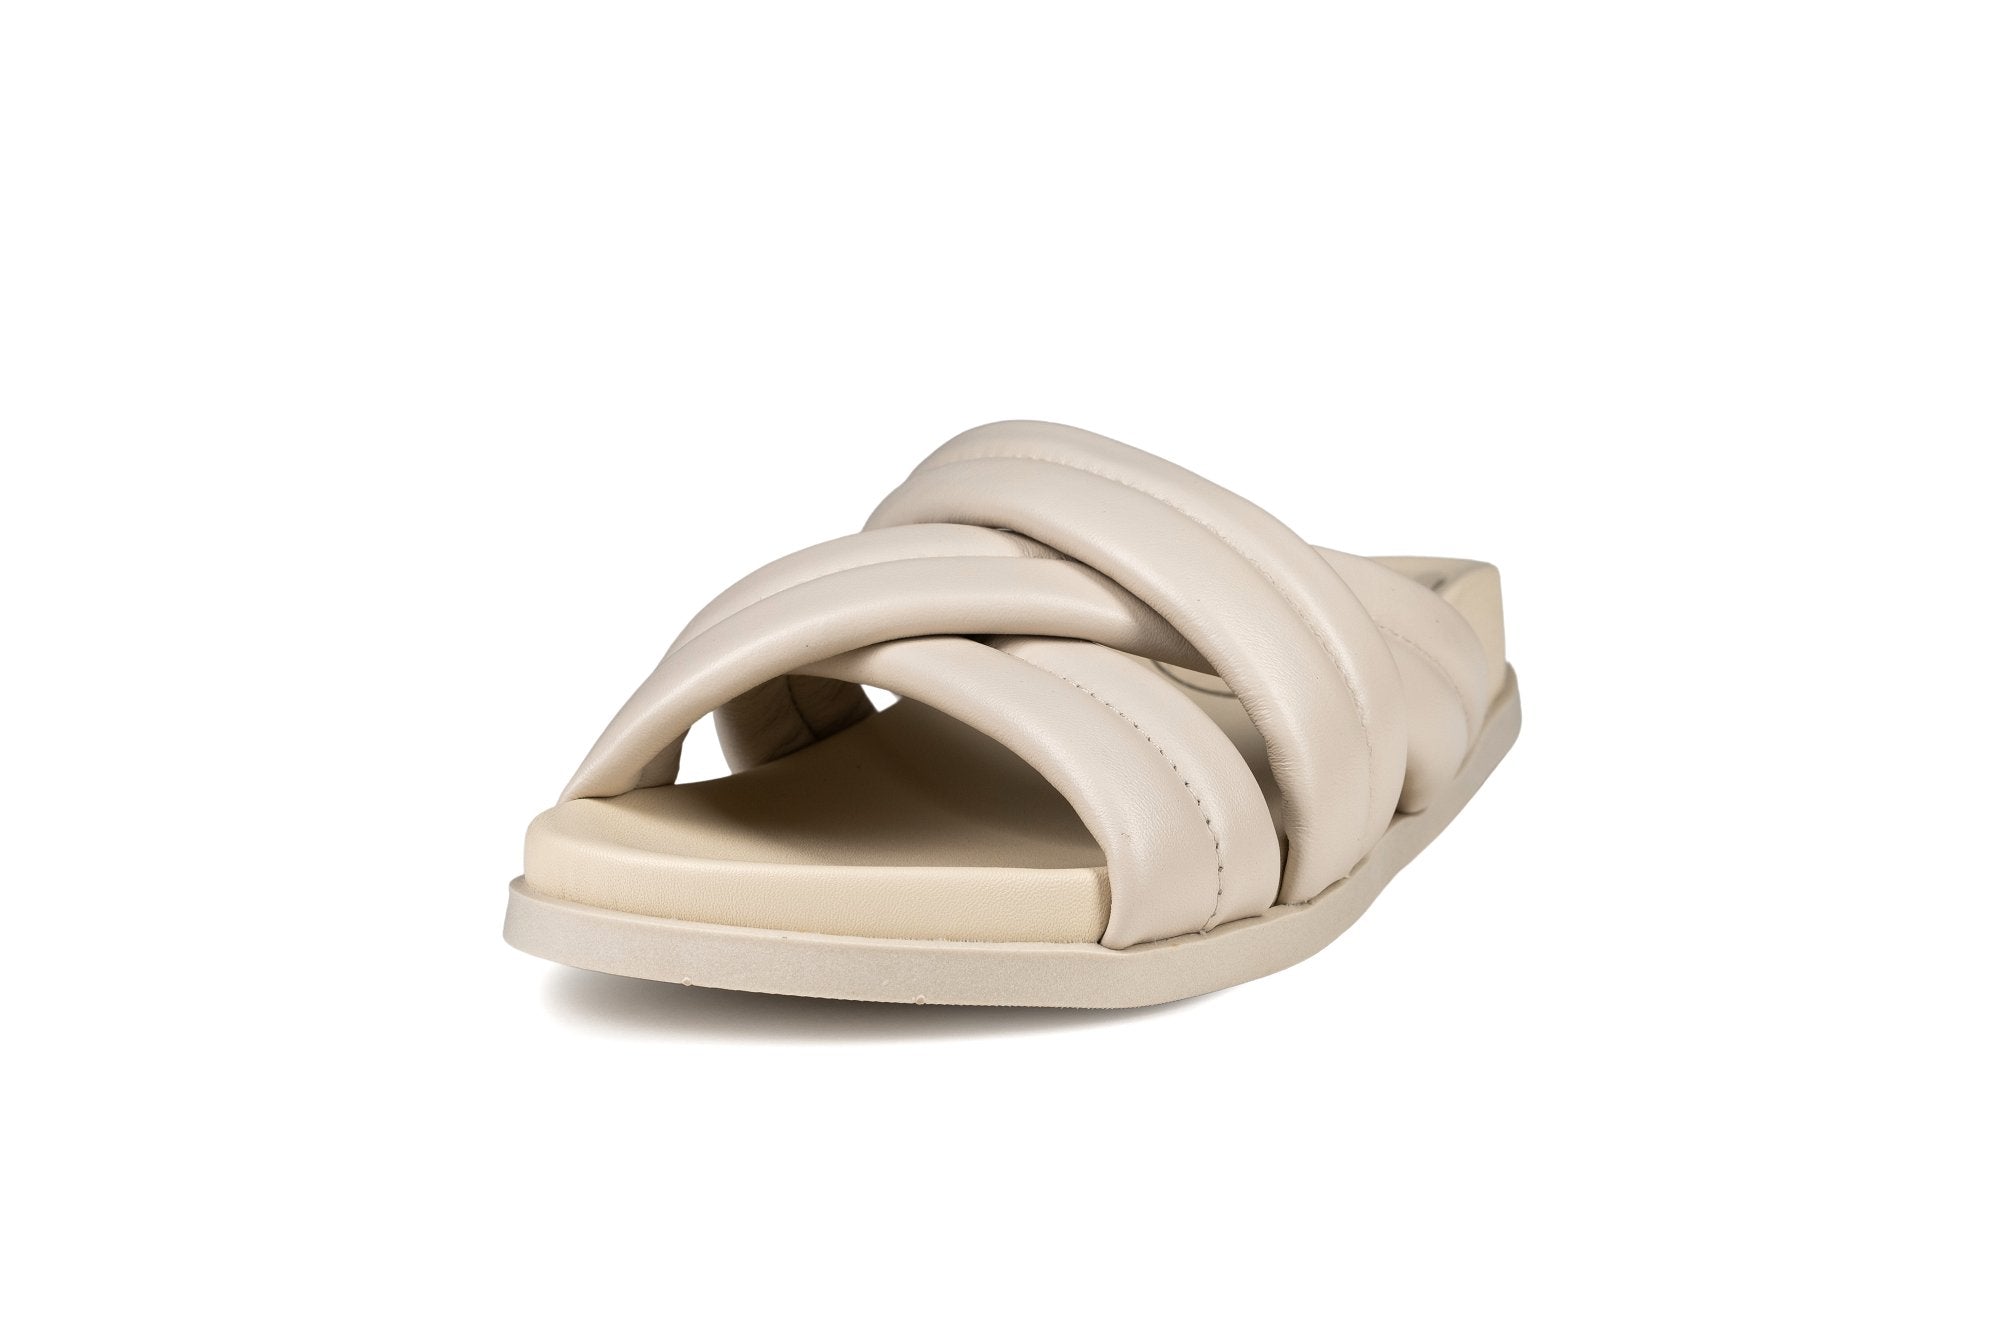 Zen Leather Slides Cream- PREORDER Flats by Sole Shoes NZ F21-36